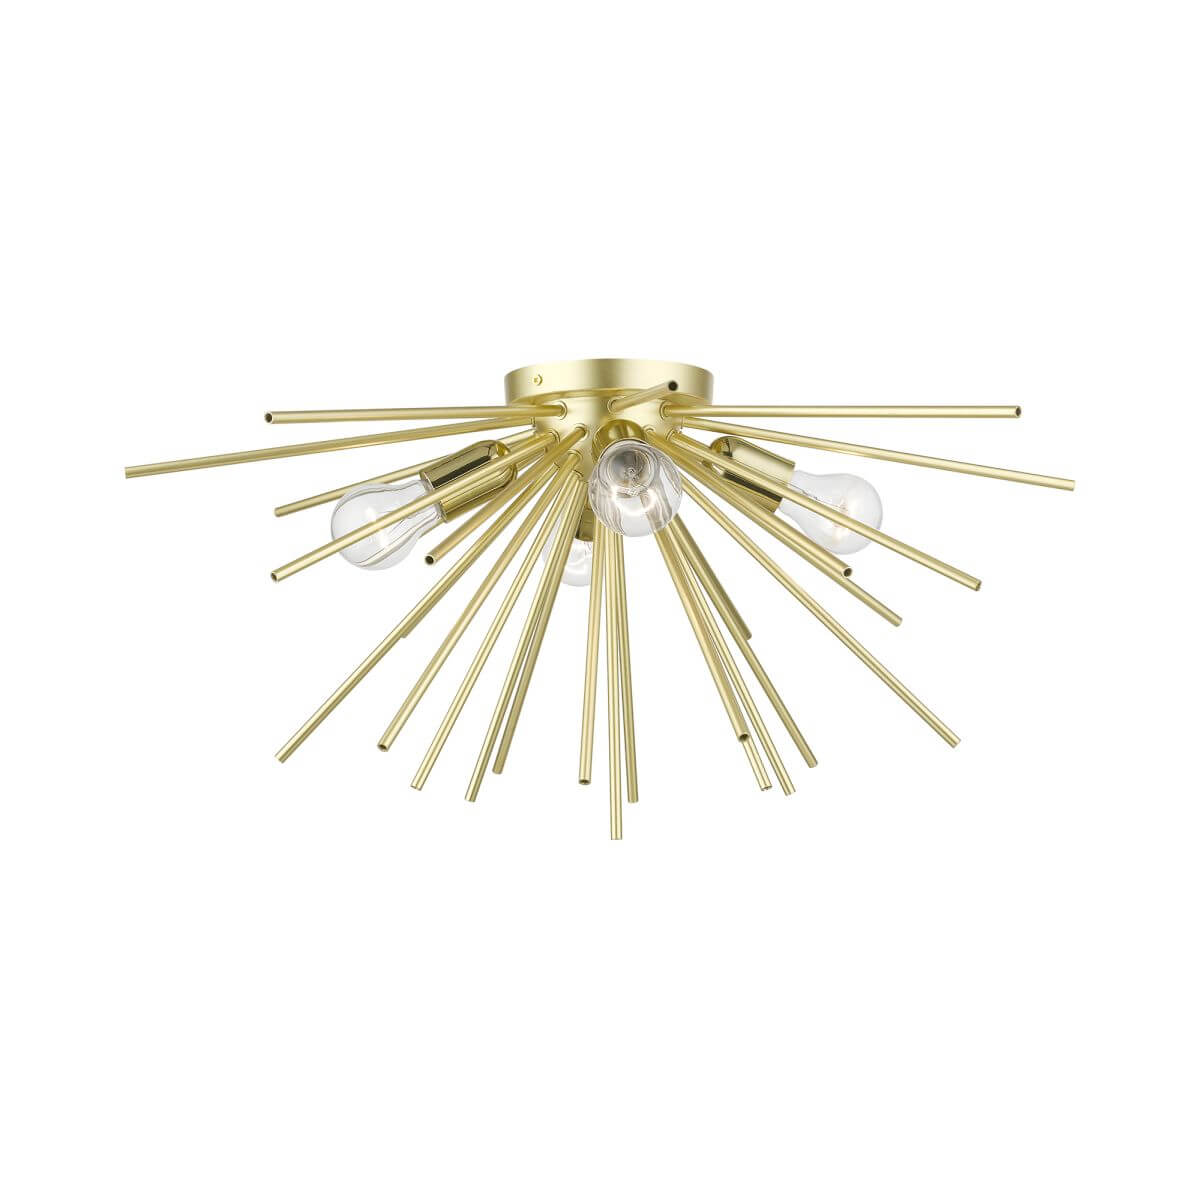 4 Light 25 inch Flush Mount in Soft Gold-Polished Brass Accents with Iron Pipe Rods - 245228